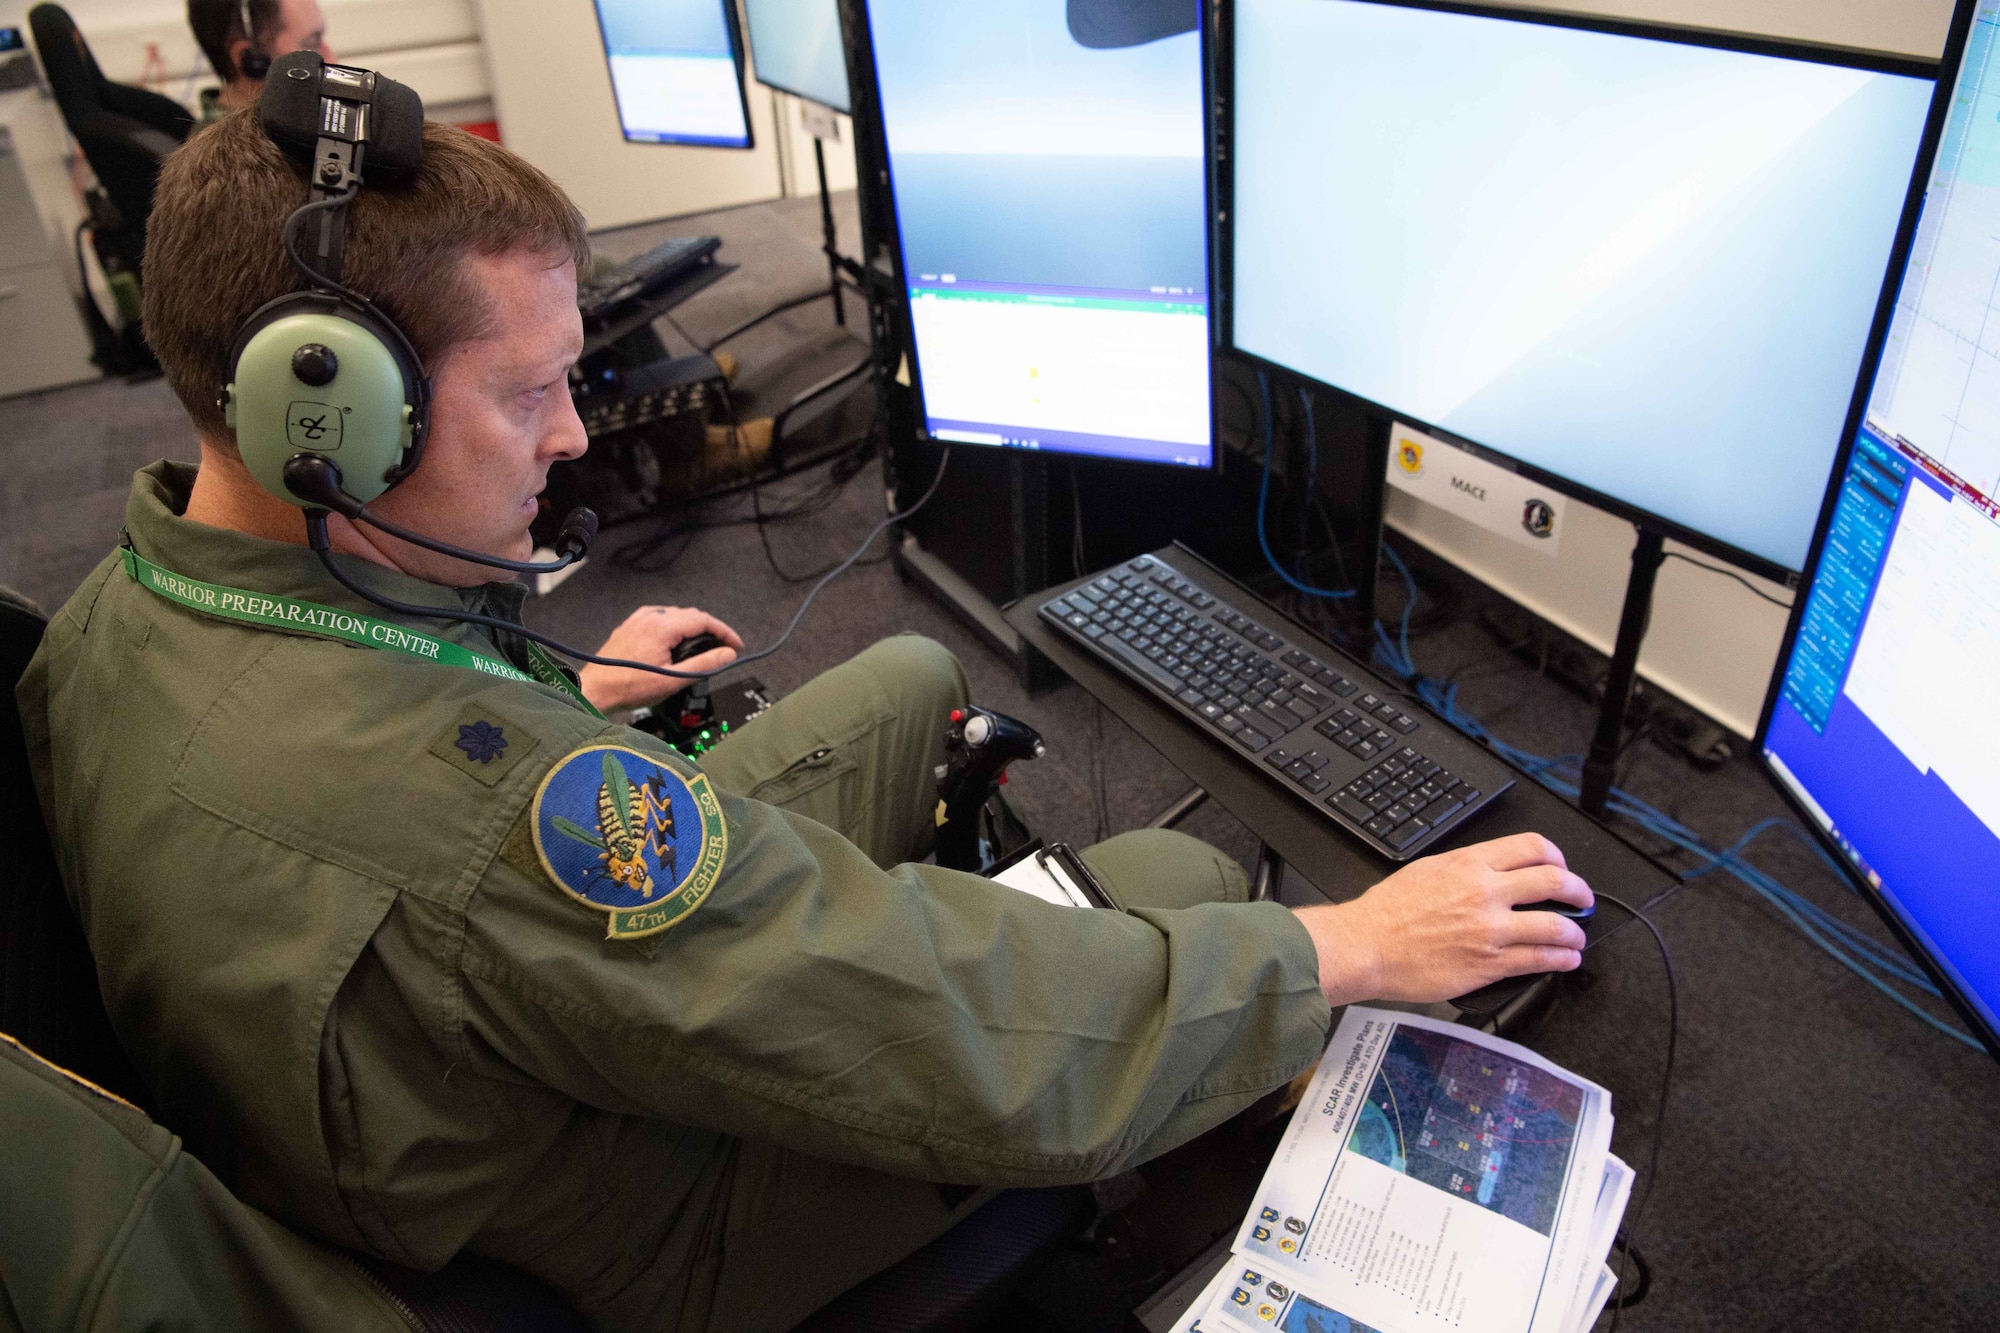 U.S. Air Force Lt. Col. Jake Lillich, 47th Fighter Squadron pilot, operates an aircraft simulator in preparation for exercise Spartan Warrior 22-9